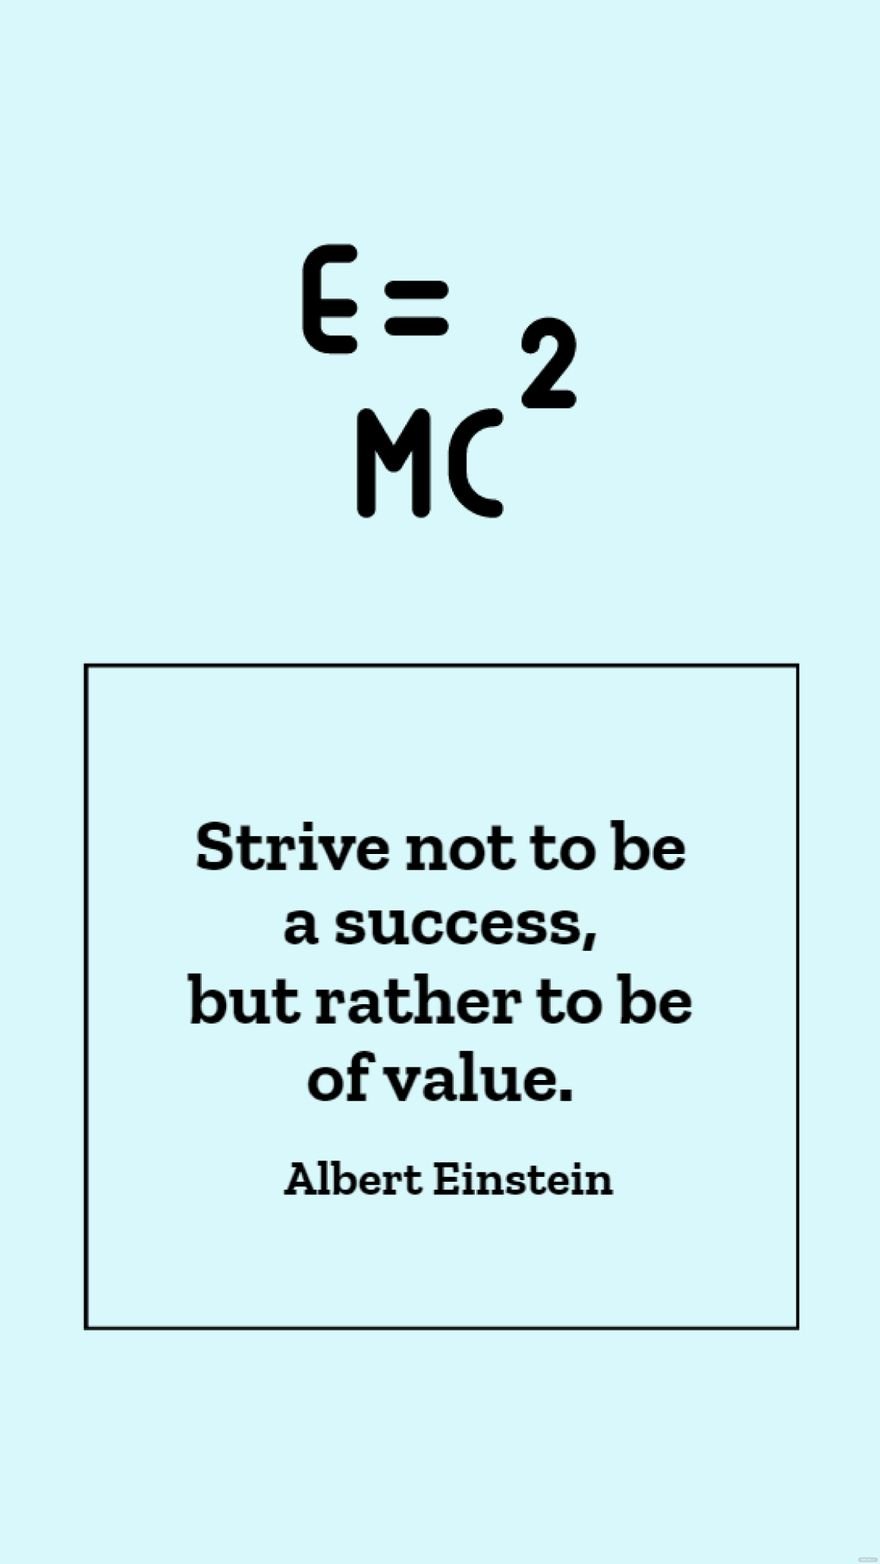 Albert Einstein - Strive not to be a success, but rather to be of value.